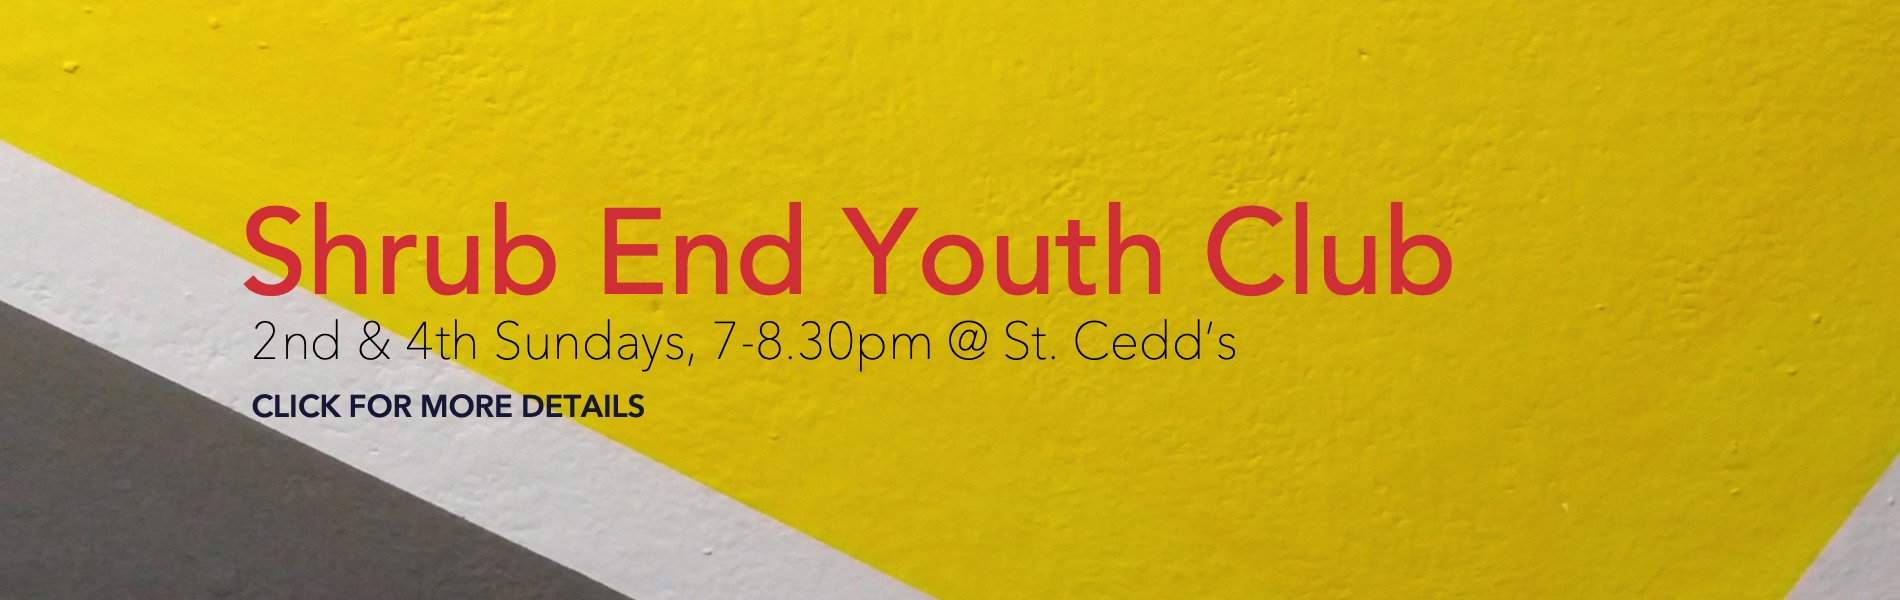 Youth Club Banner